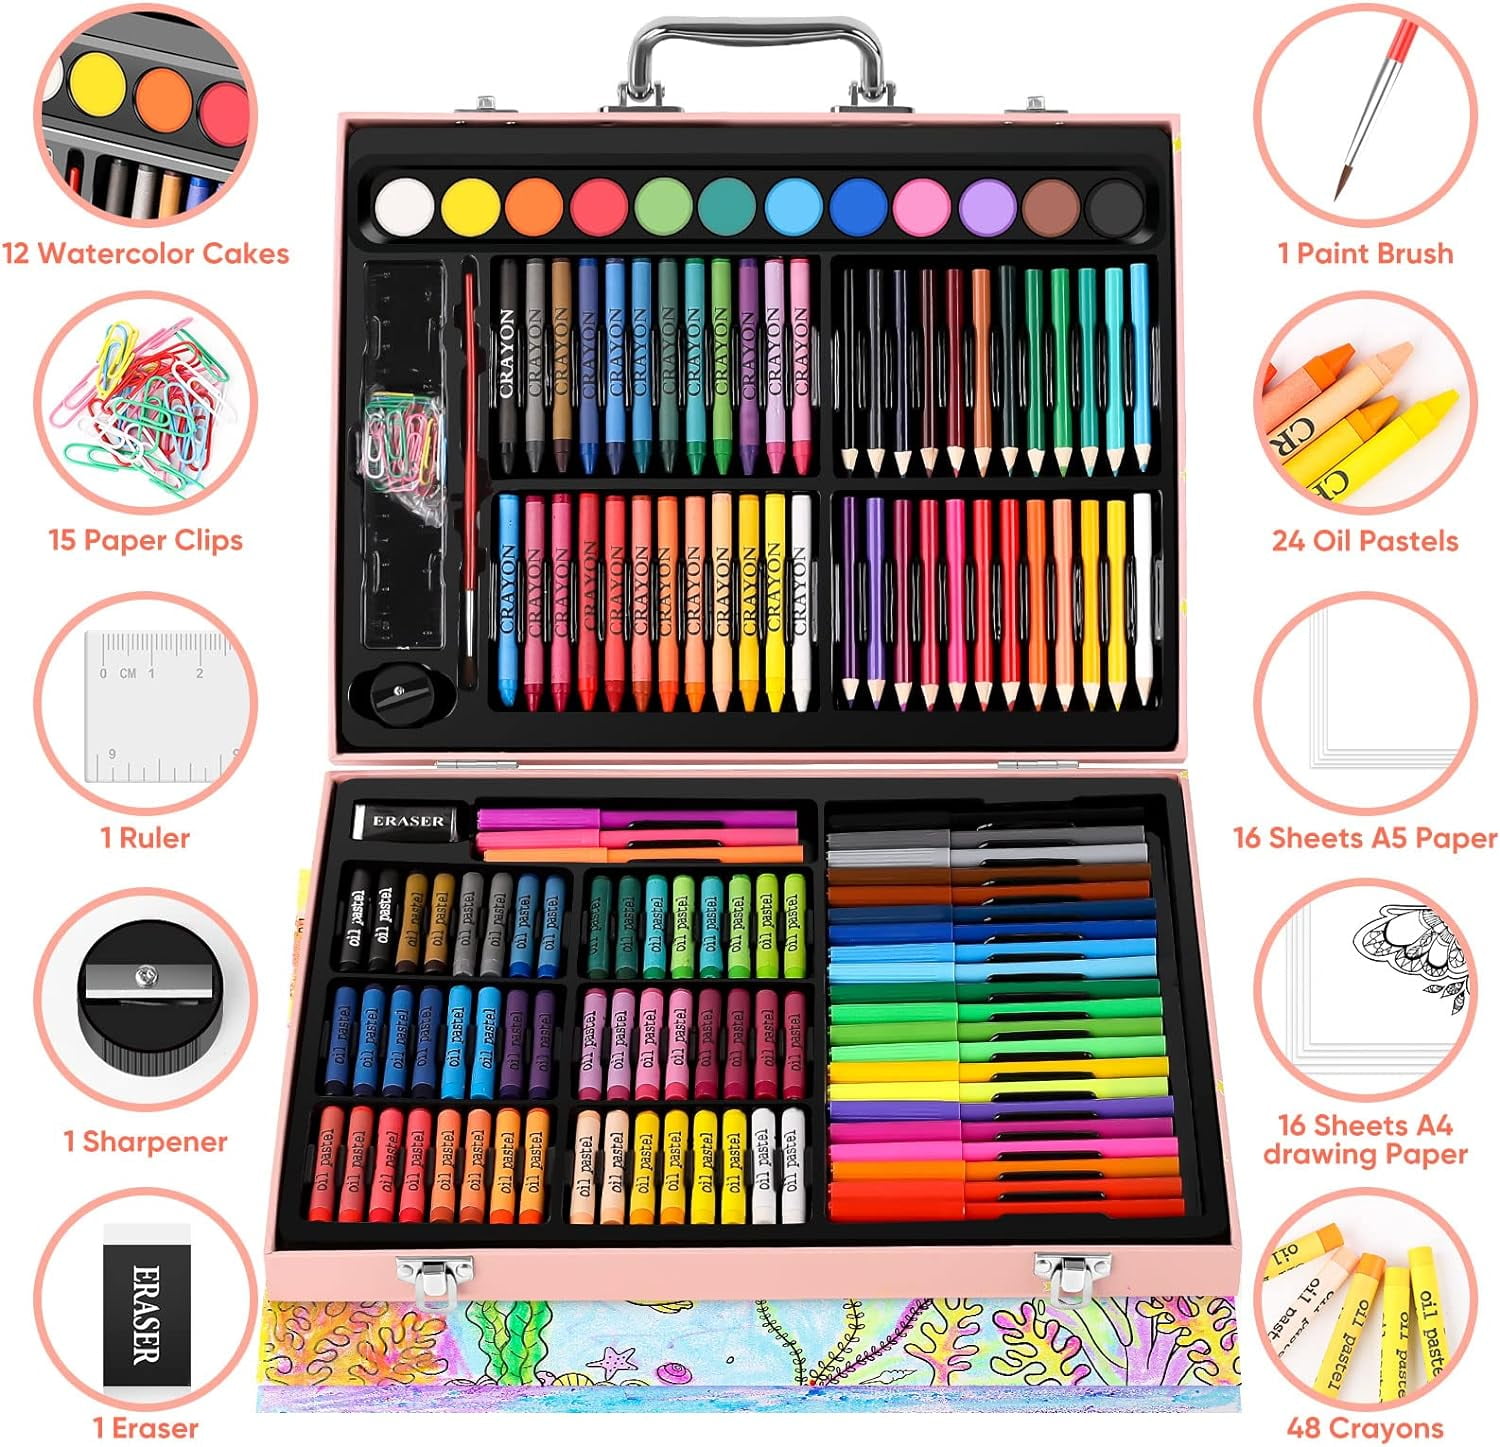 Arts and Crafts Supplies Soucolor, 183-Pack Drawing Painting Set for Kids  Girls Boys Teens, Coloring Art Kit Gift Case: Crayons, Oil Pastels,  Watercolors Cake, Colored Pencils Markers, Sketch Paper 